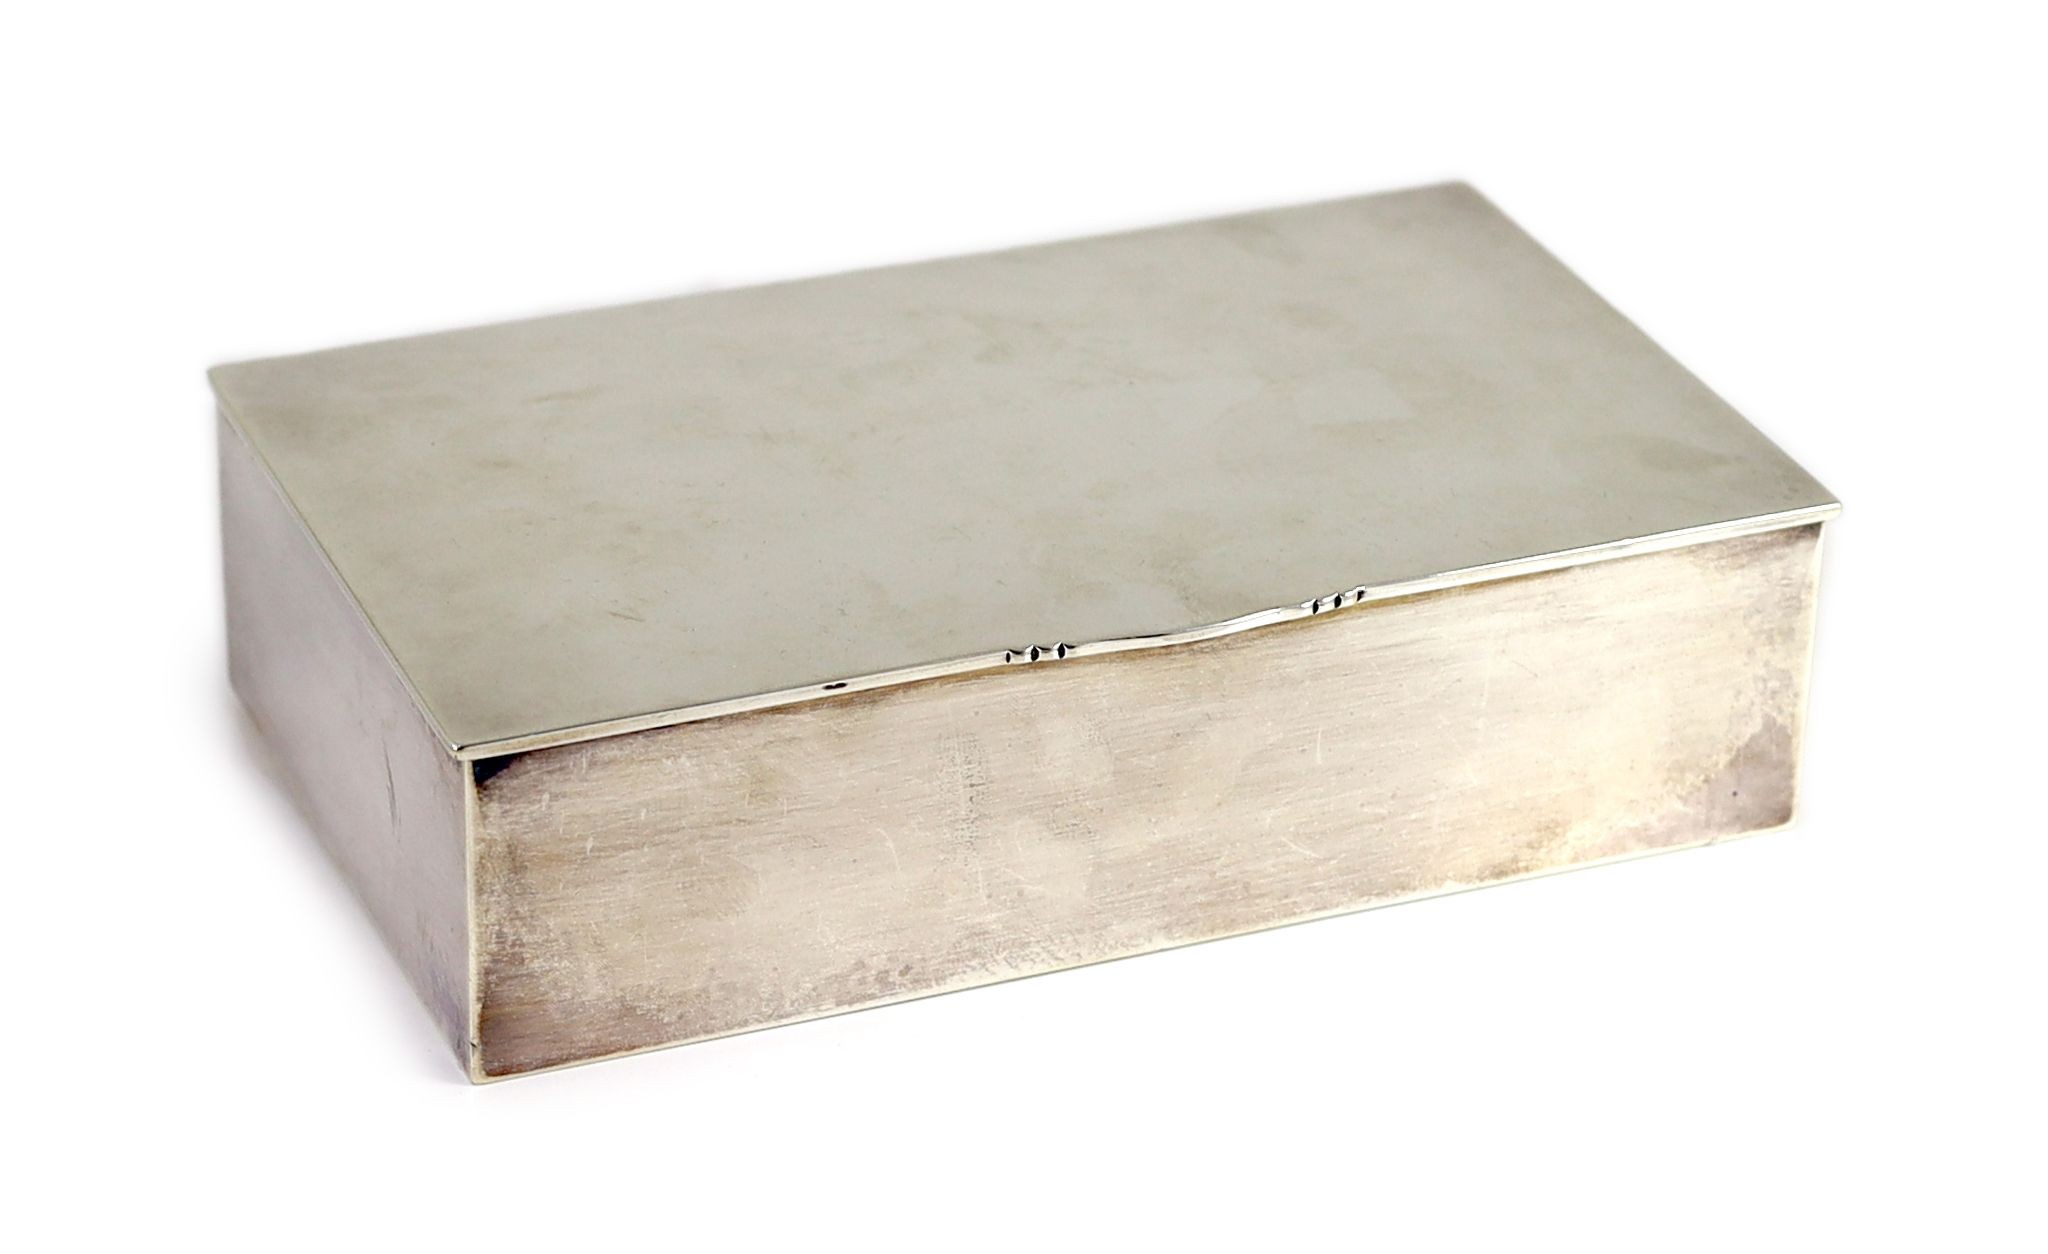 A 1930's planished silver rectangular cigarette box, by Georg Jensen, import marks, for London, 1938